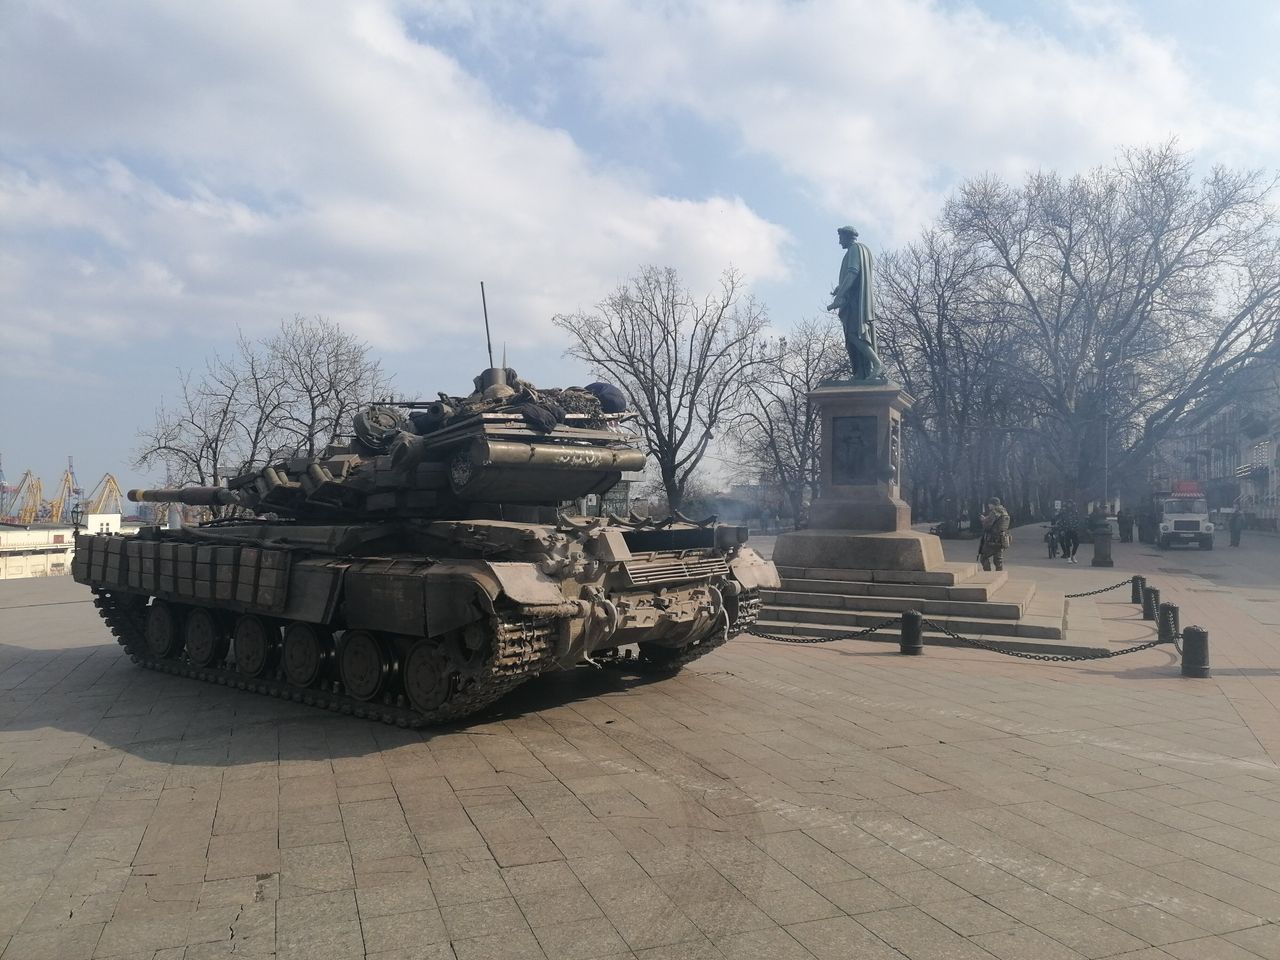 A Ukrainian military tank is seen near the Potemkin Stairs in the center of Odesa.